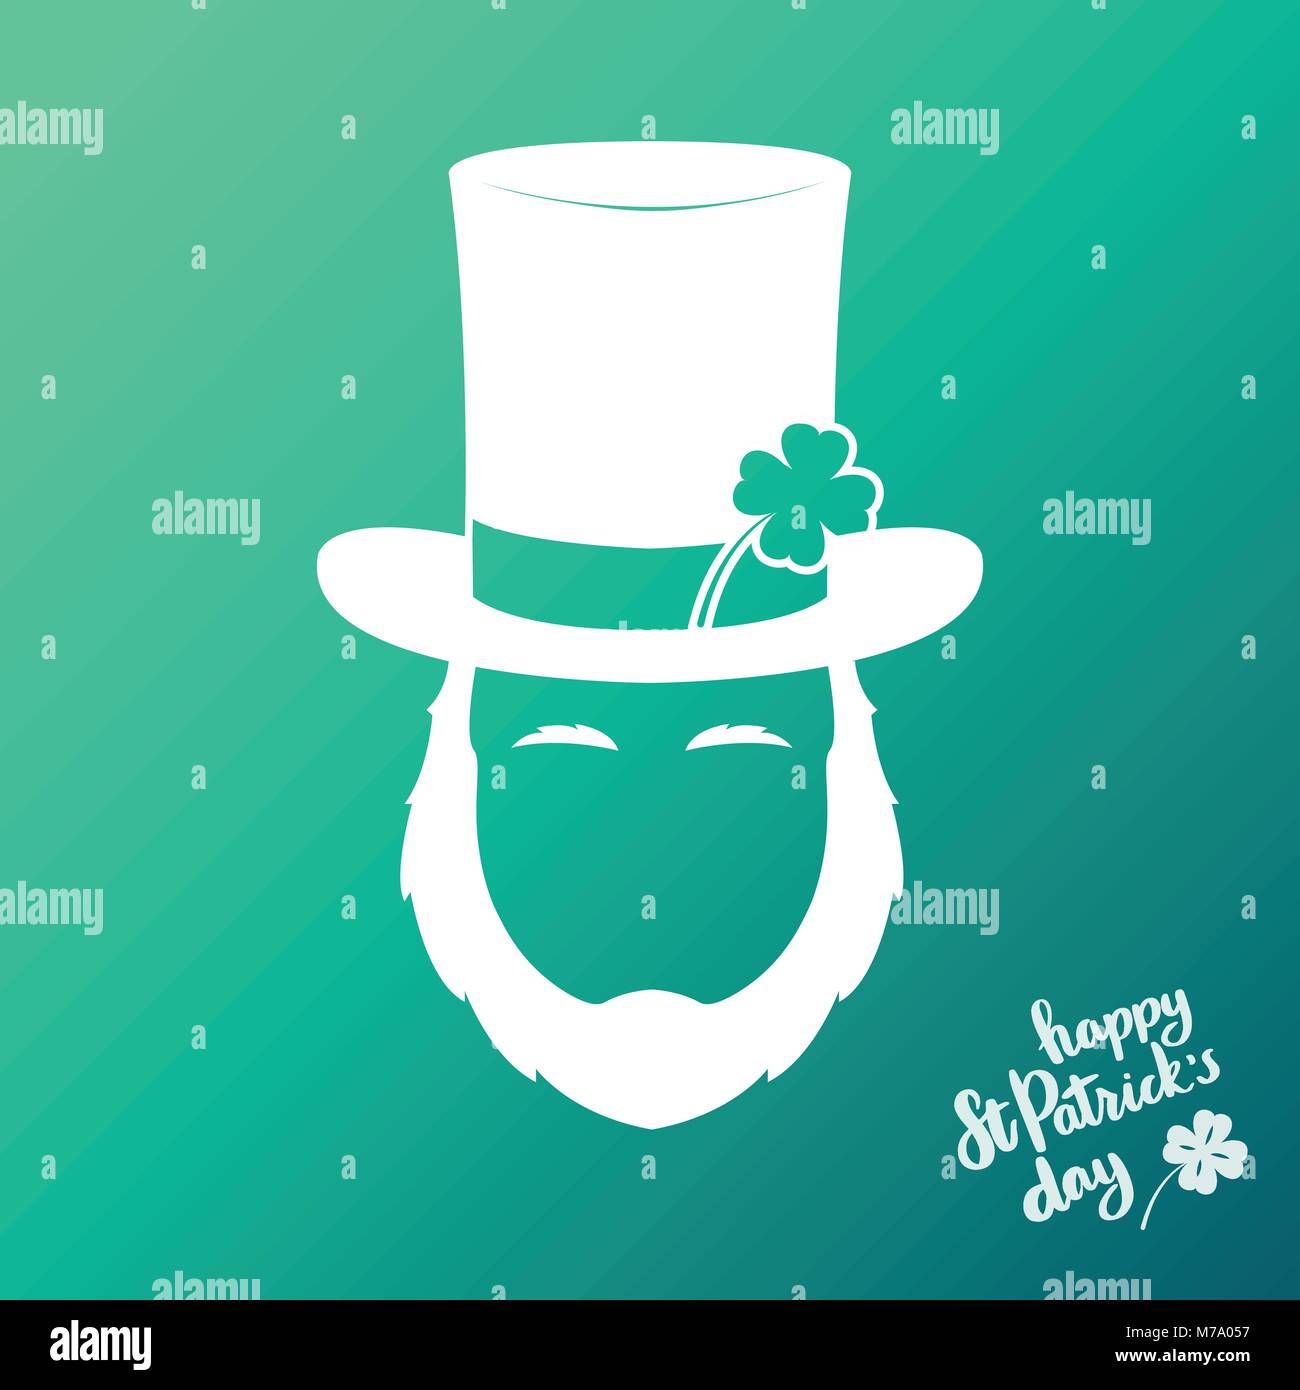 Happy St Patricks Day Images – Browse 1,949 Stock Photos, Vectors